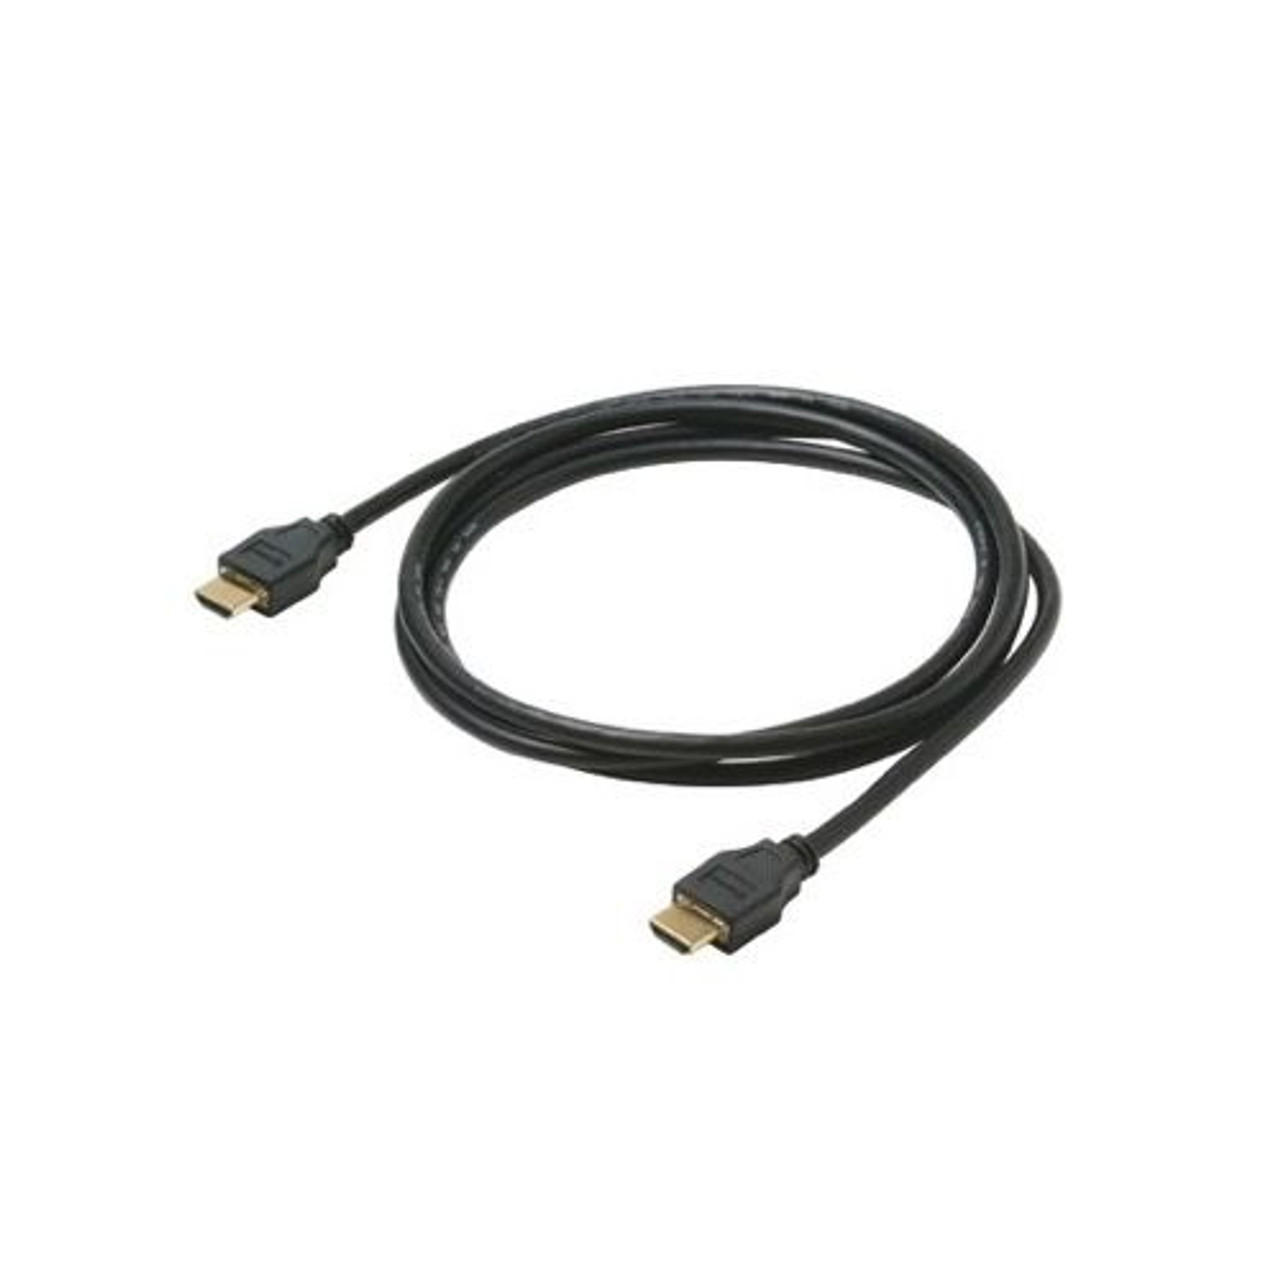 Steren 506-136BK 6' Foot USB Micro A to Micro B Cable Black USB Data Cable for PDA, MP3 Player, Camera, Cell Phone, Etc